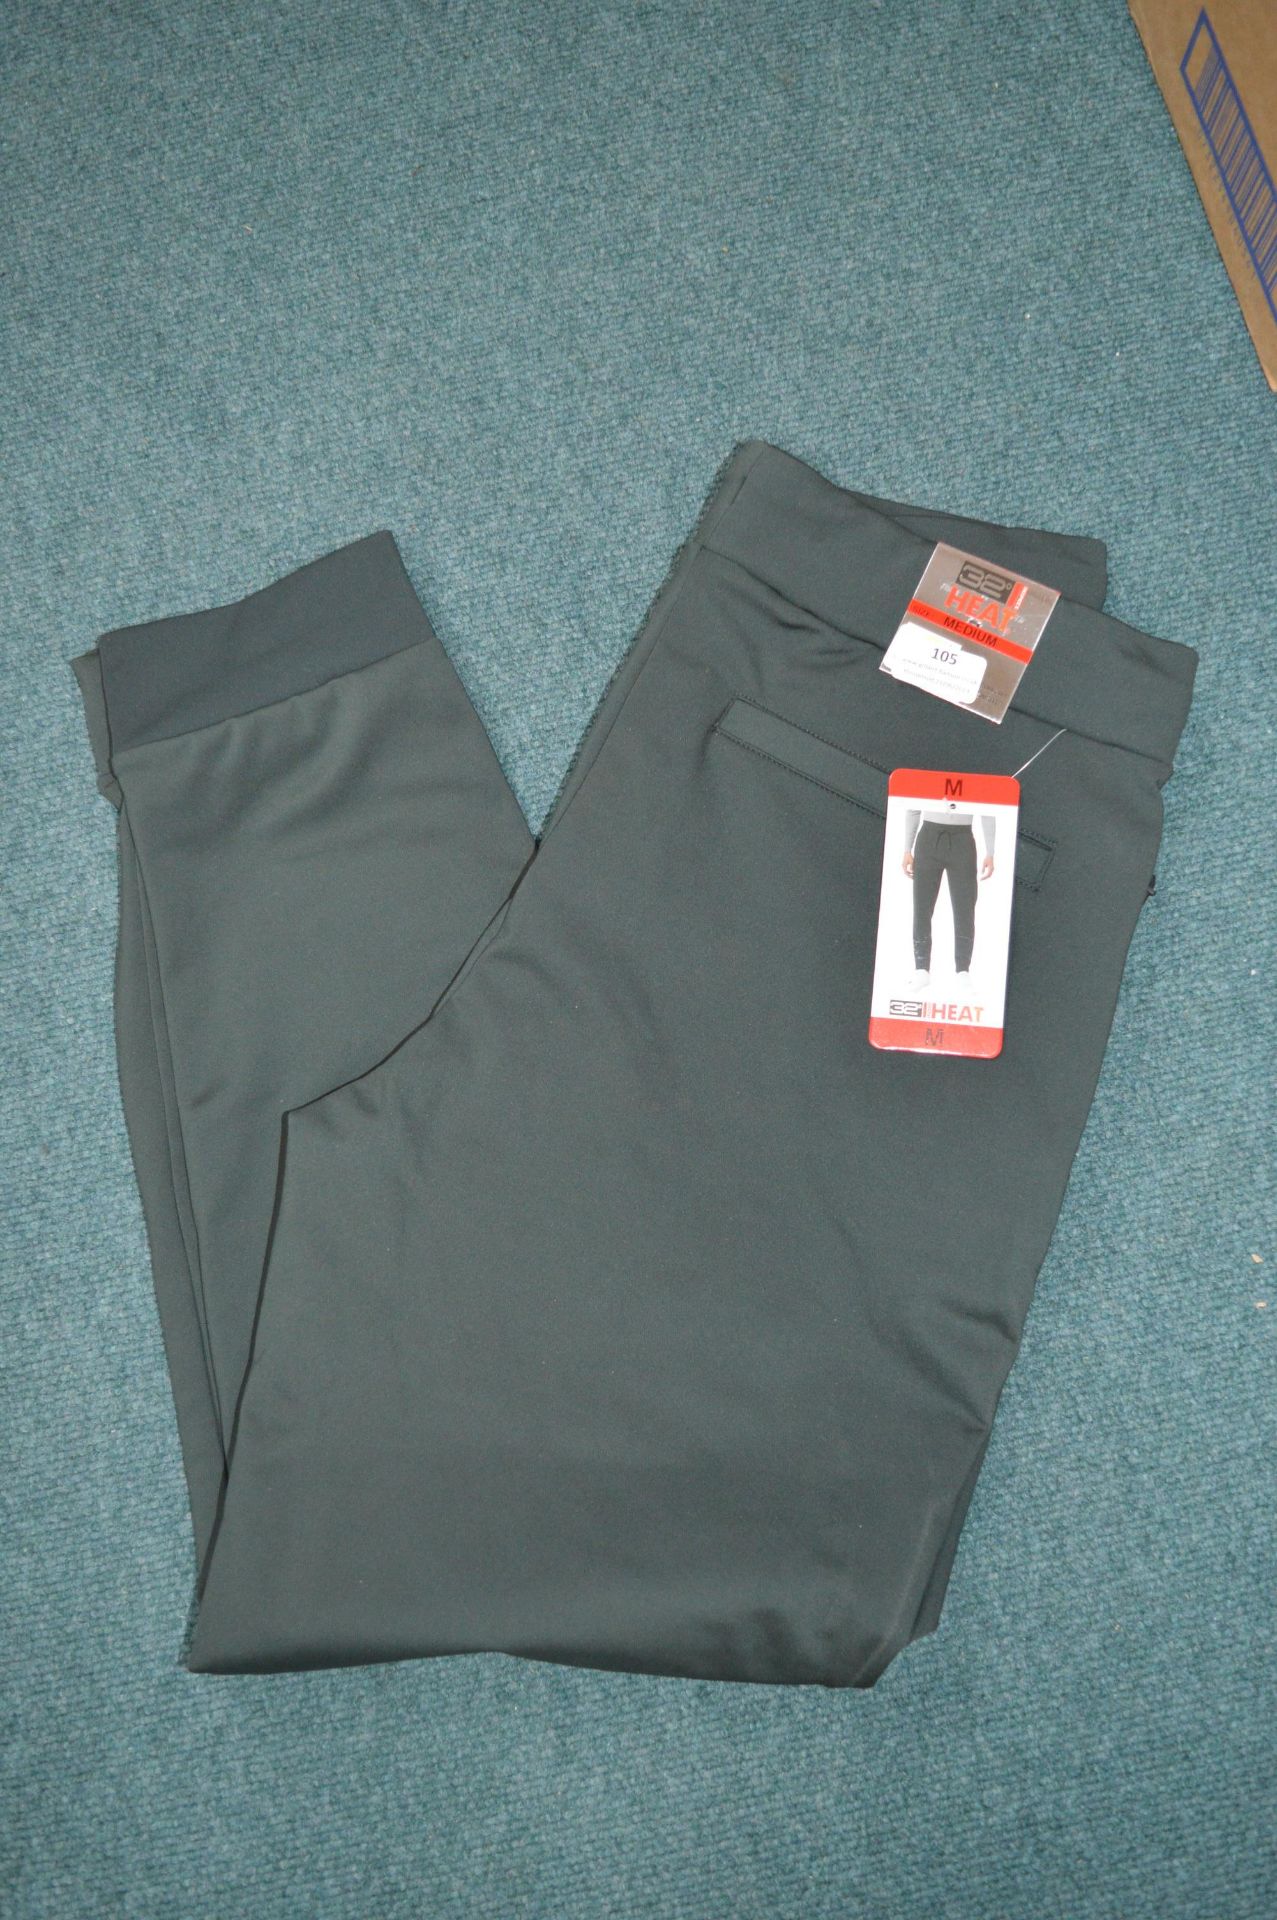 *32 Degrees Heat Gent's Trousers Size: M